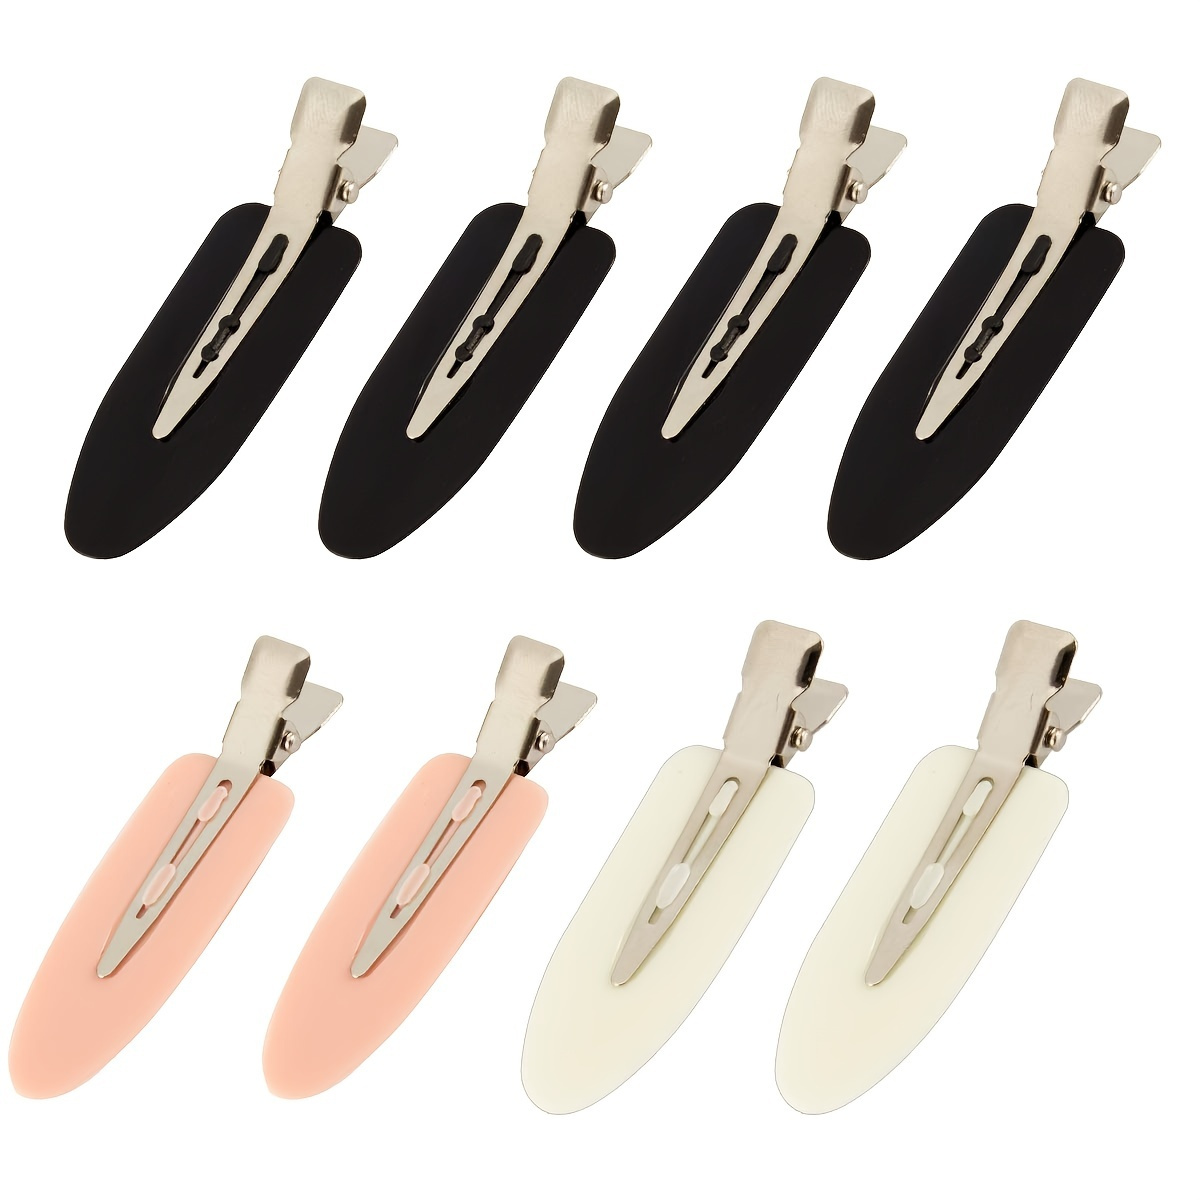 

8pcs No Bend Hair Clip No Crease Hair Clips Styling Clips No Dent Hair Barrettes For Salon Hairstyle Hairdressing Bangs Waves Woman Girl Makeup Application